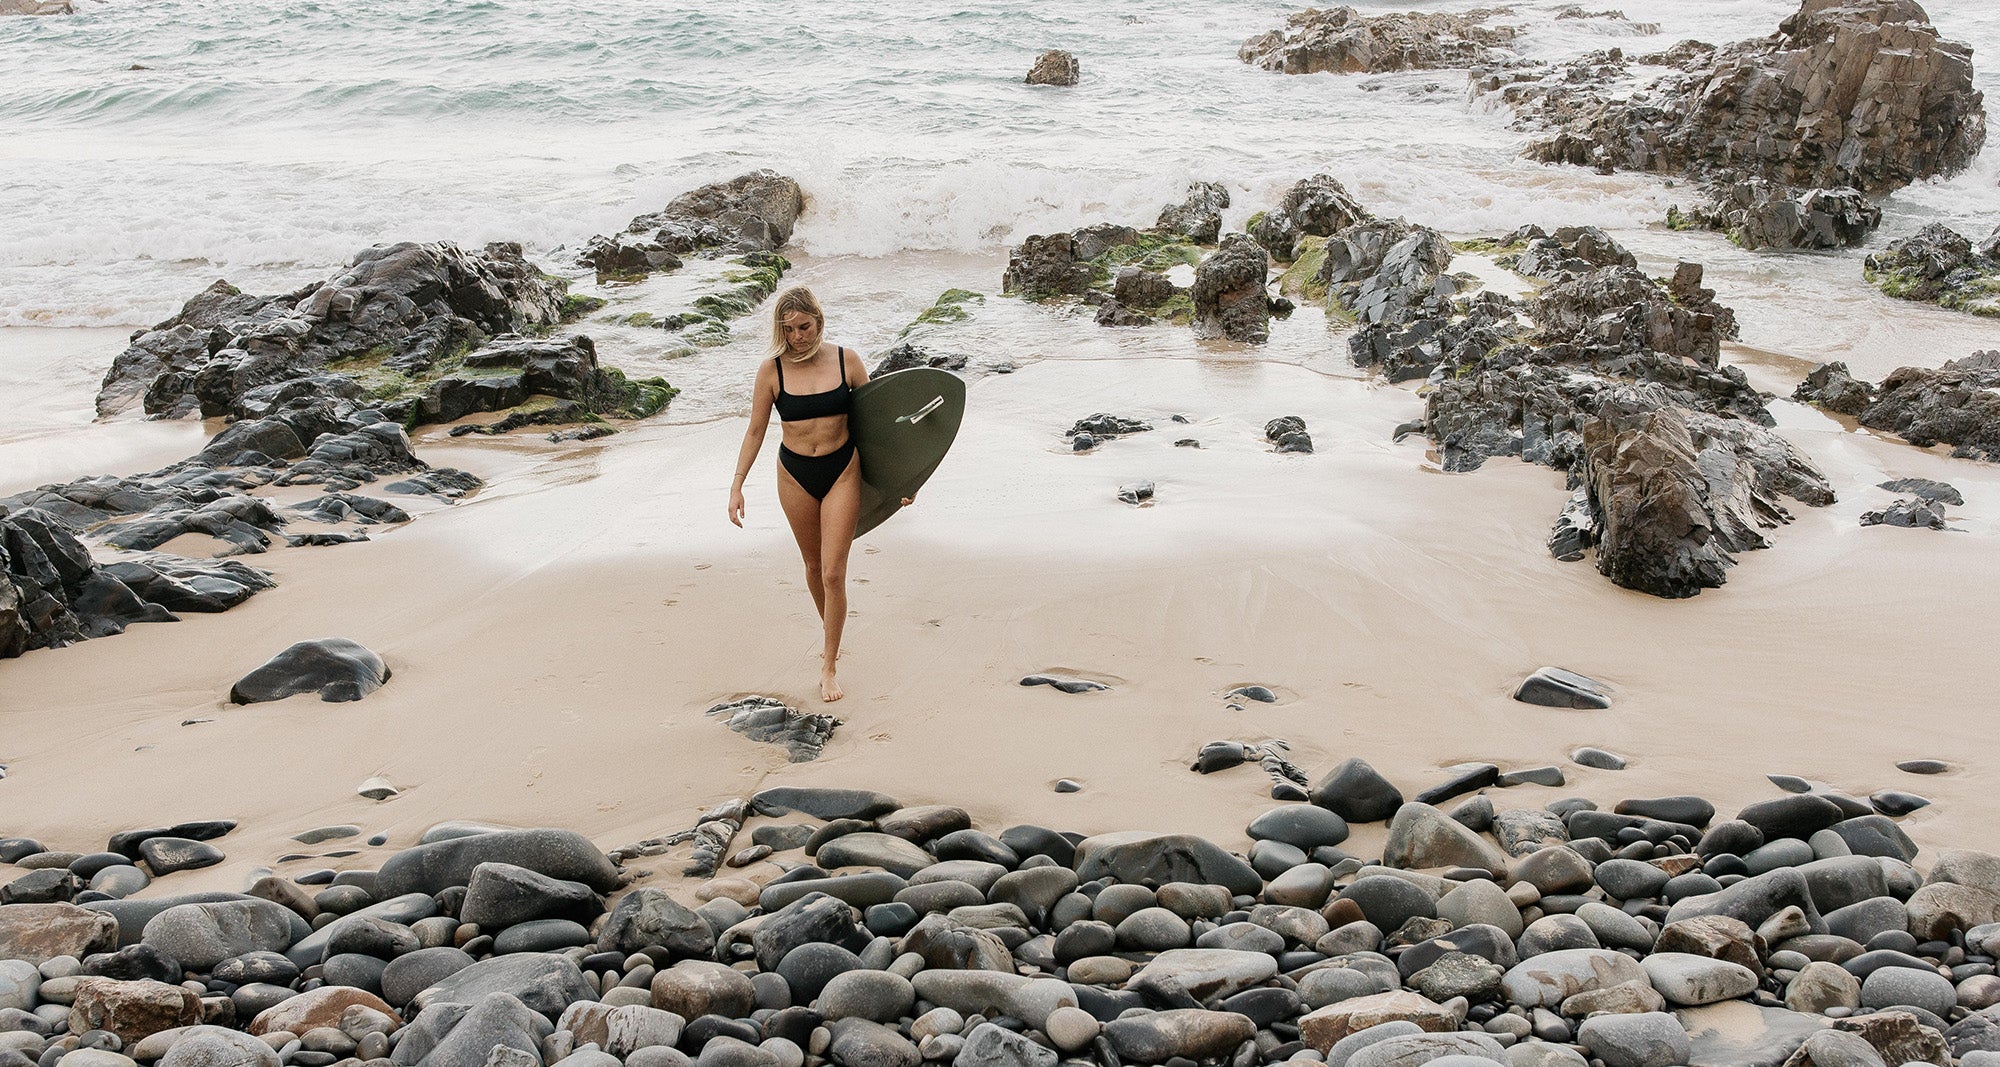 Woman walking out of the water holding a surfboard wearing a black surf bikini on a sandy and rock beach